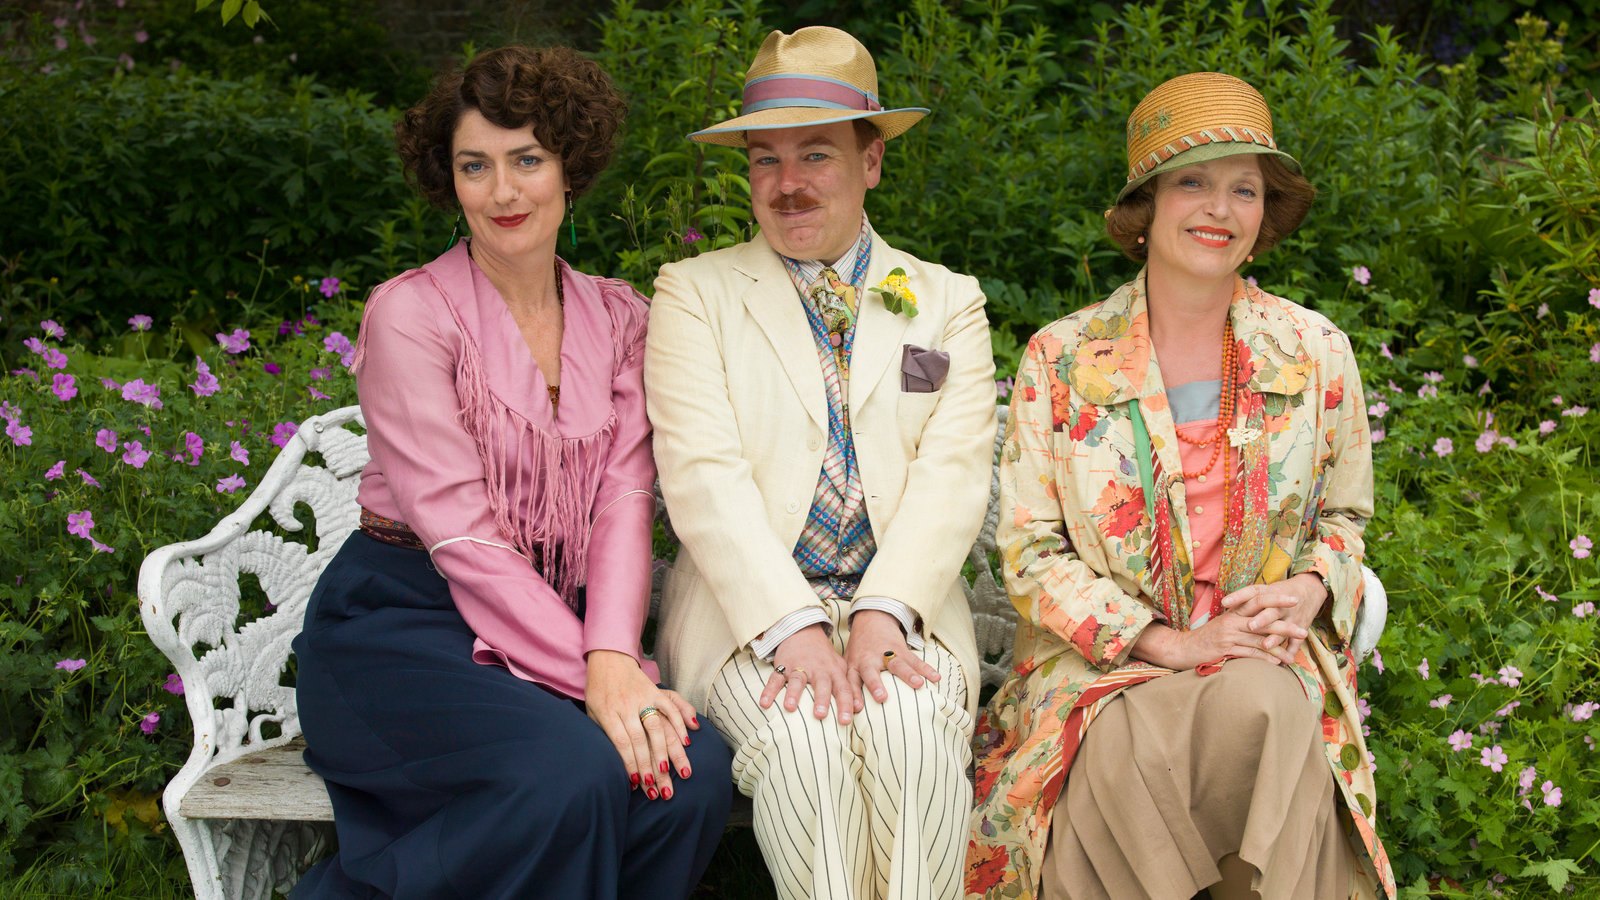 DVD review: Mapp & Lucia | Chris Hallam's World View